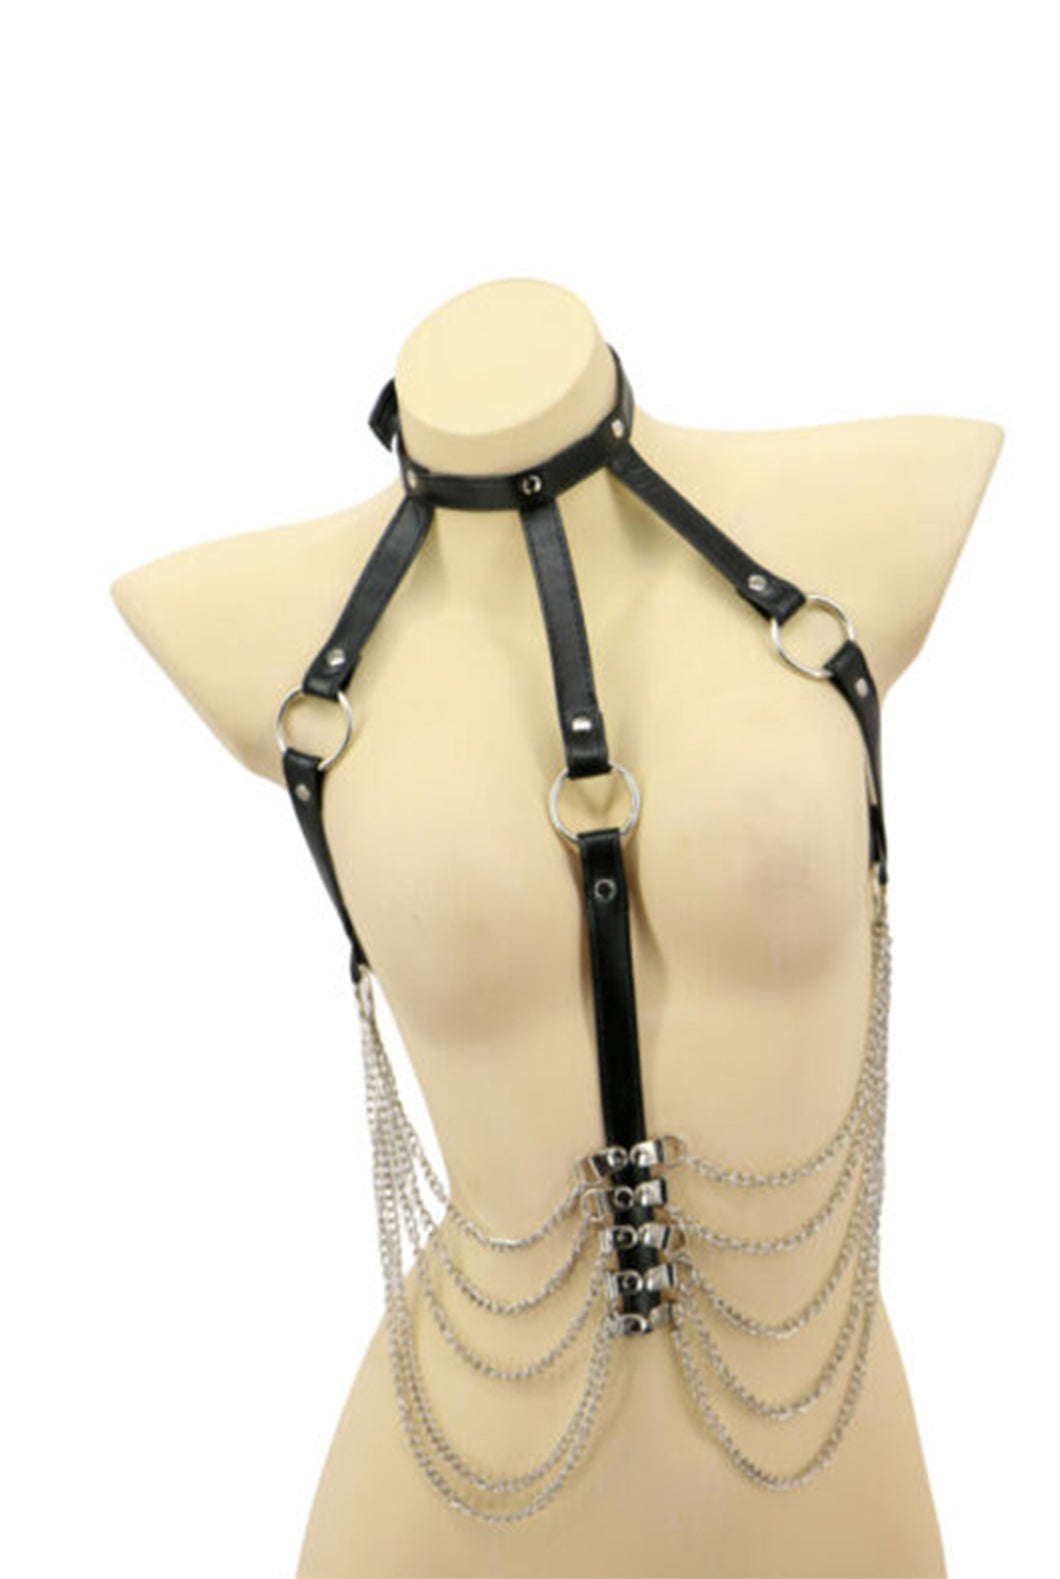 Leatherette Top With Chains